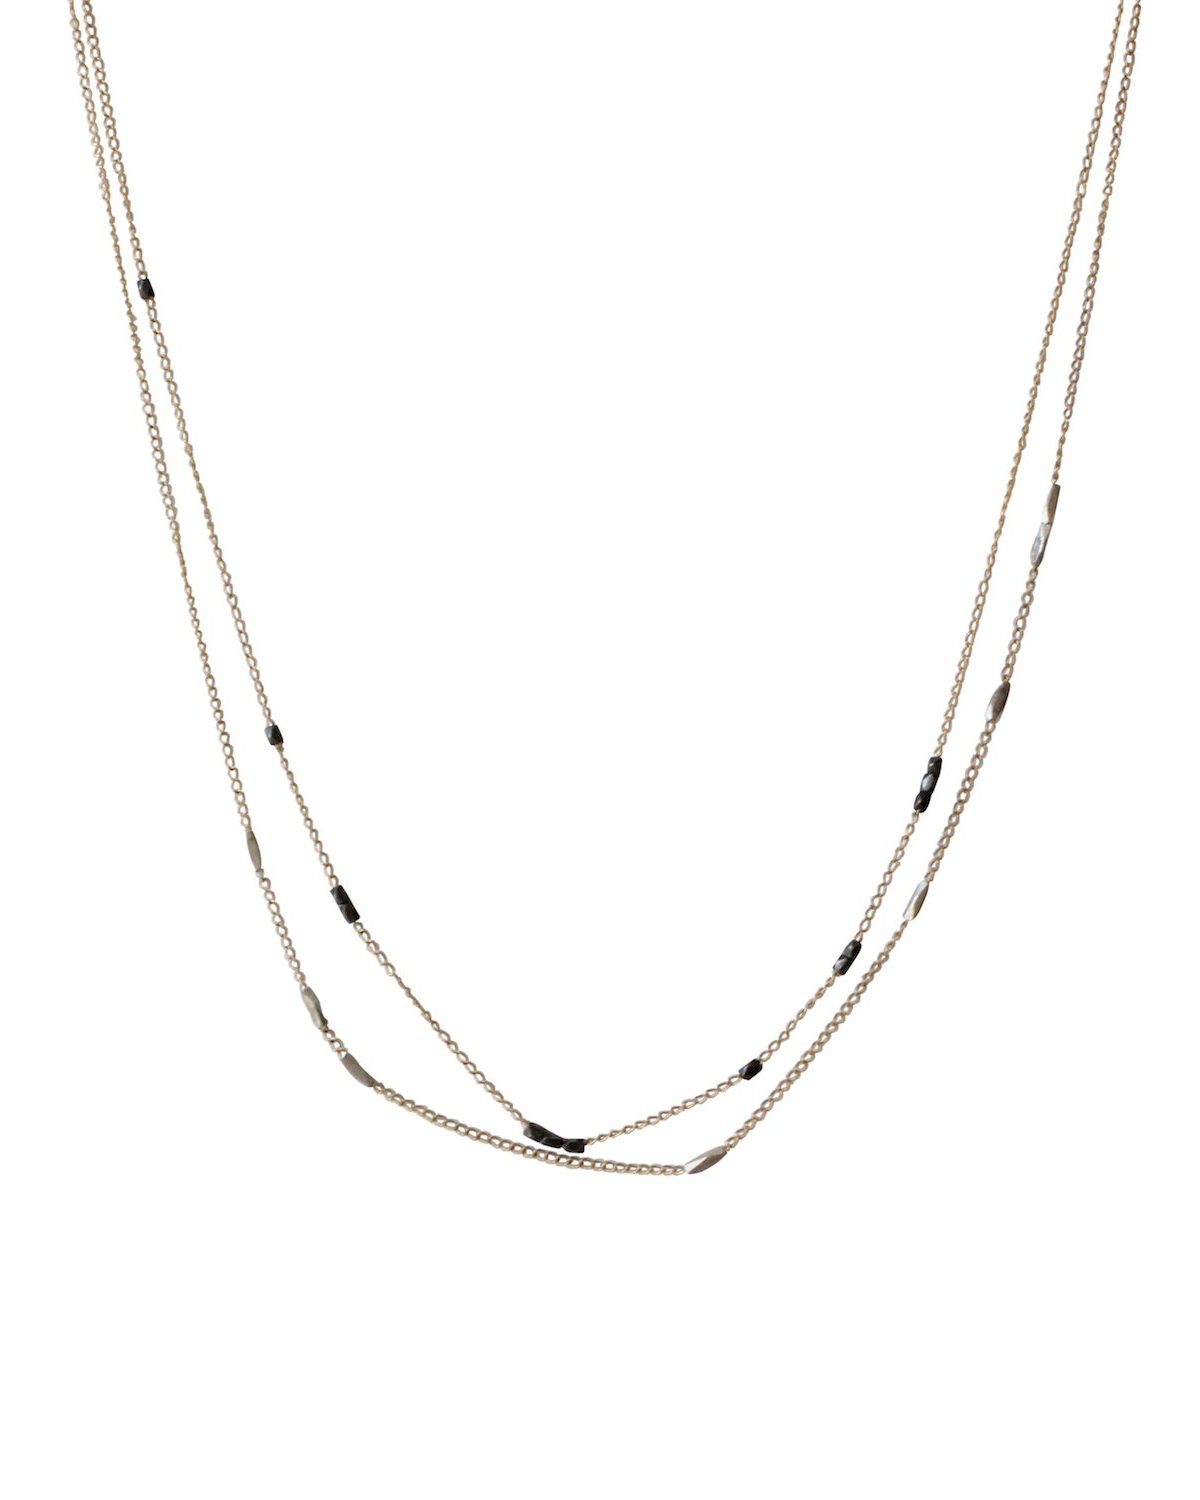 Double Strand Beaded Chain Necklace in Yellow Gold